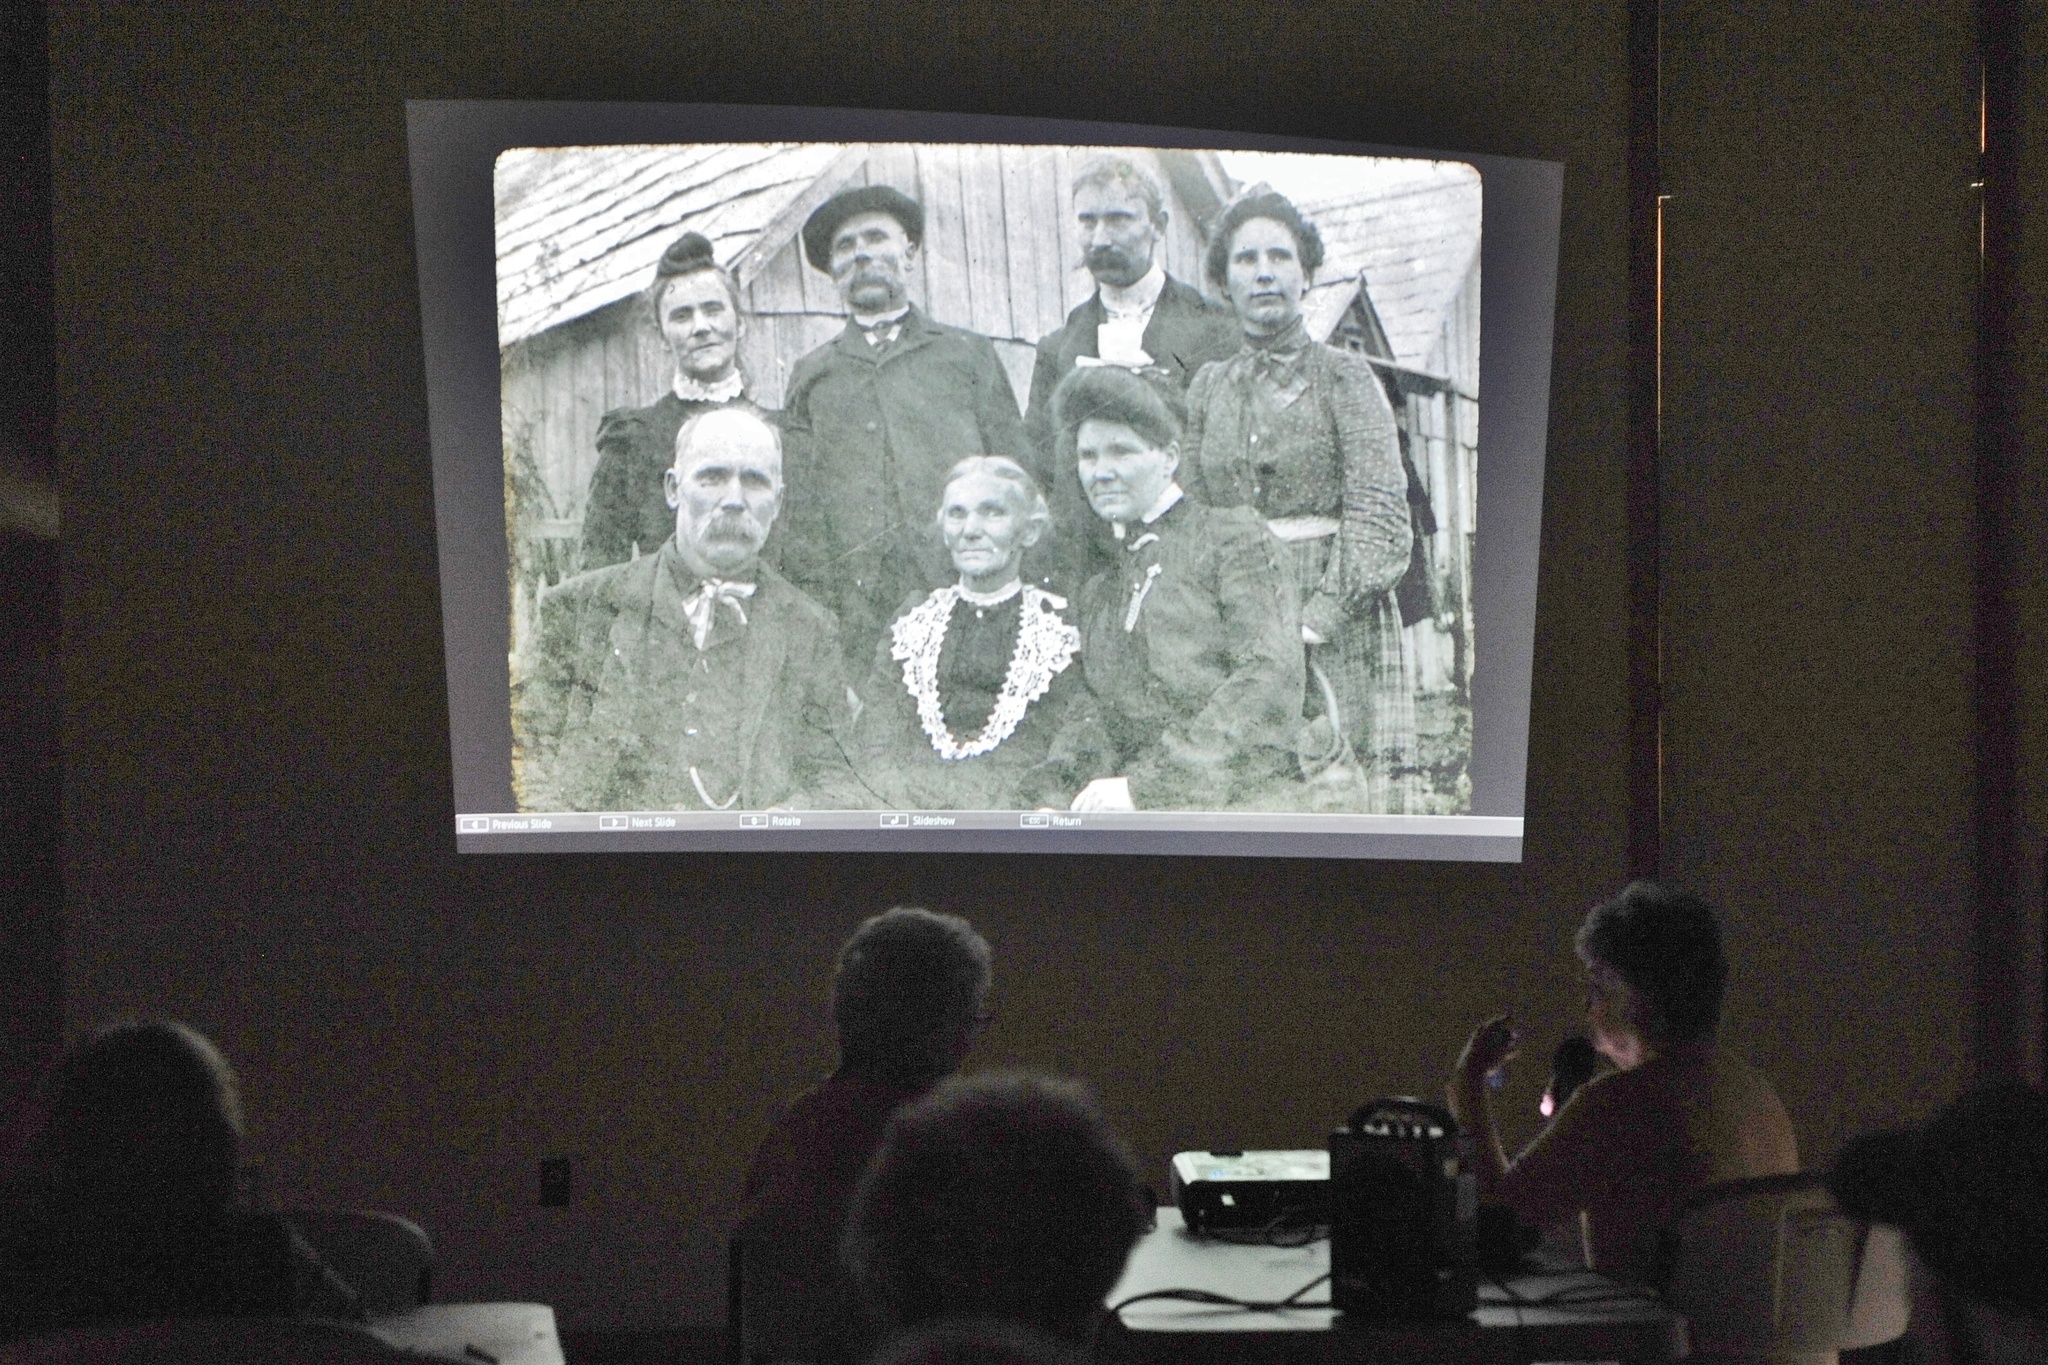 West End Historical Society member Adria Fuhrman shows slides of early days photos during the November historical society’s meeting held at the RAC. The group intends to show more of the West End photos during the 2017 season. The group meets at noon the third Tuesday of each month at the Rainforest Arts Center. The public is invited. Photo by Lonnie Archibald